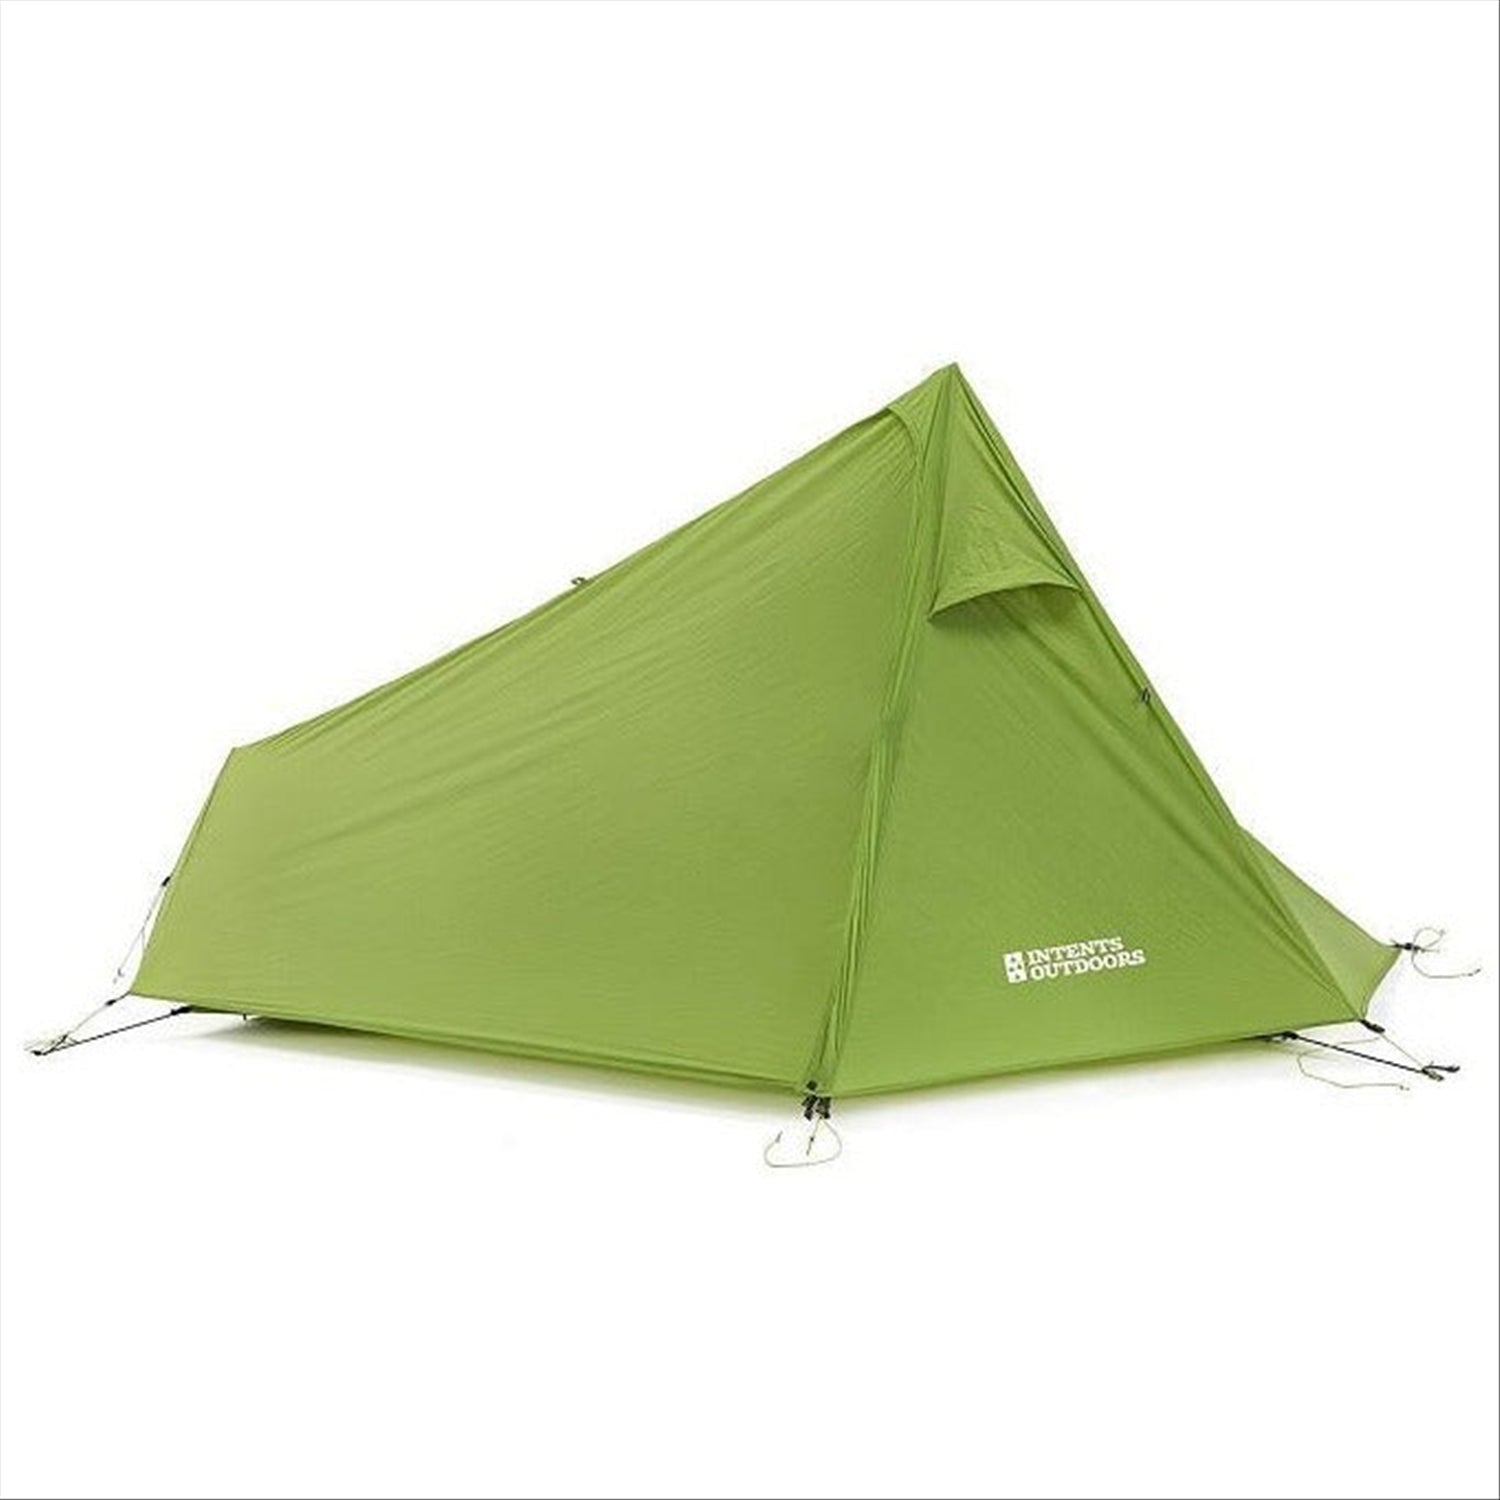 Ultrapack DW - Ultralight Nylon 1 Person Hiking Tent, Double Wall, 900g